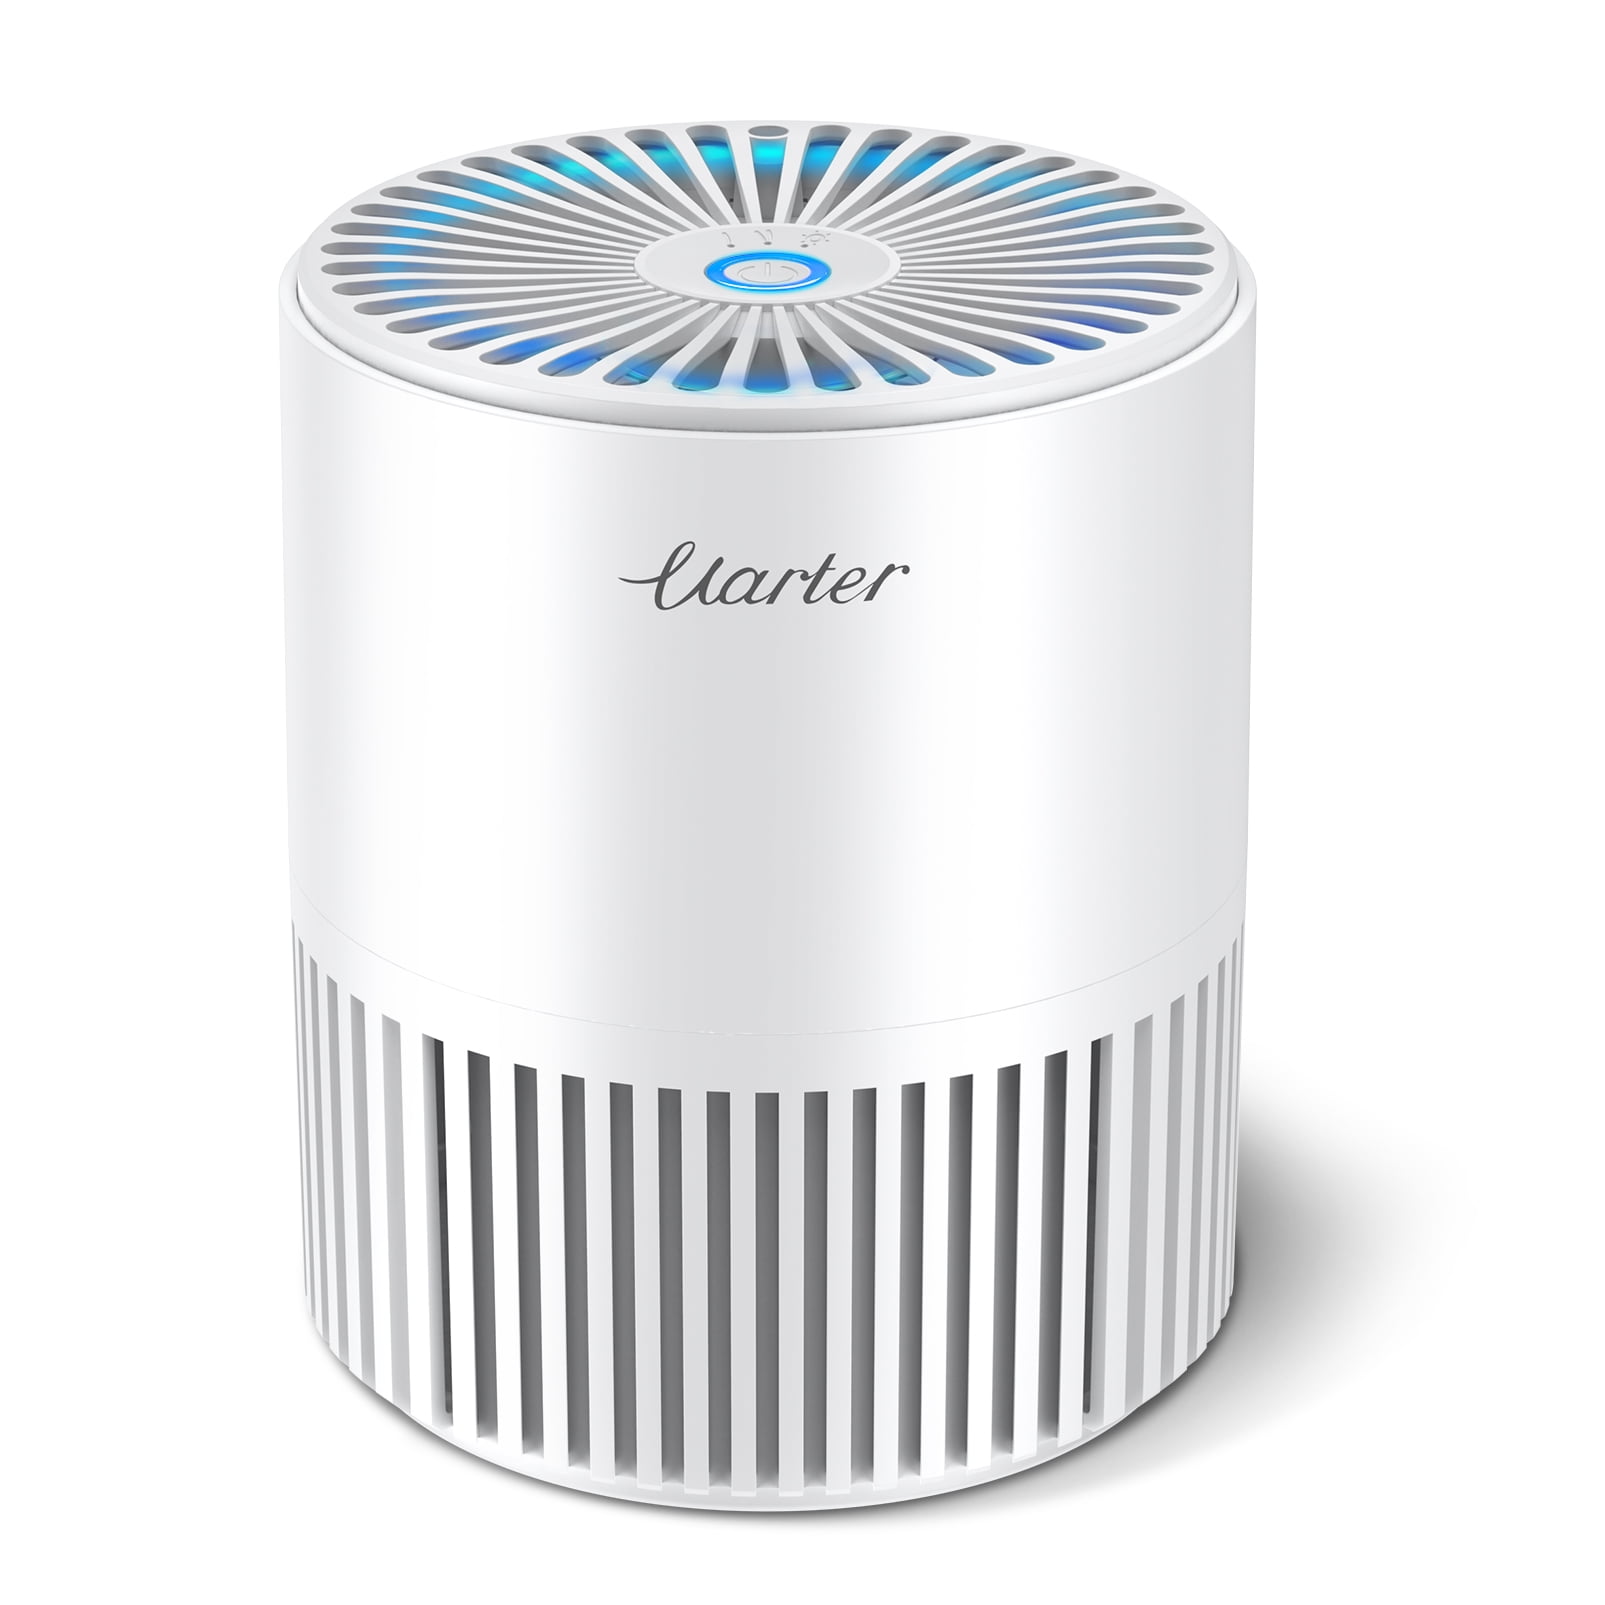 Details about  / Portable Ionizer Air Purifier Intelligent Car Home Aroma Diffuser HEPA Filter